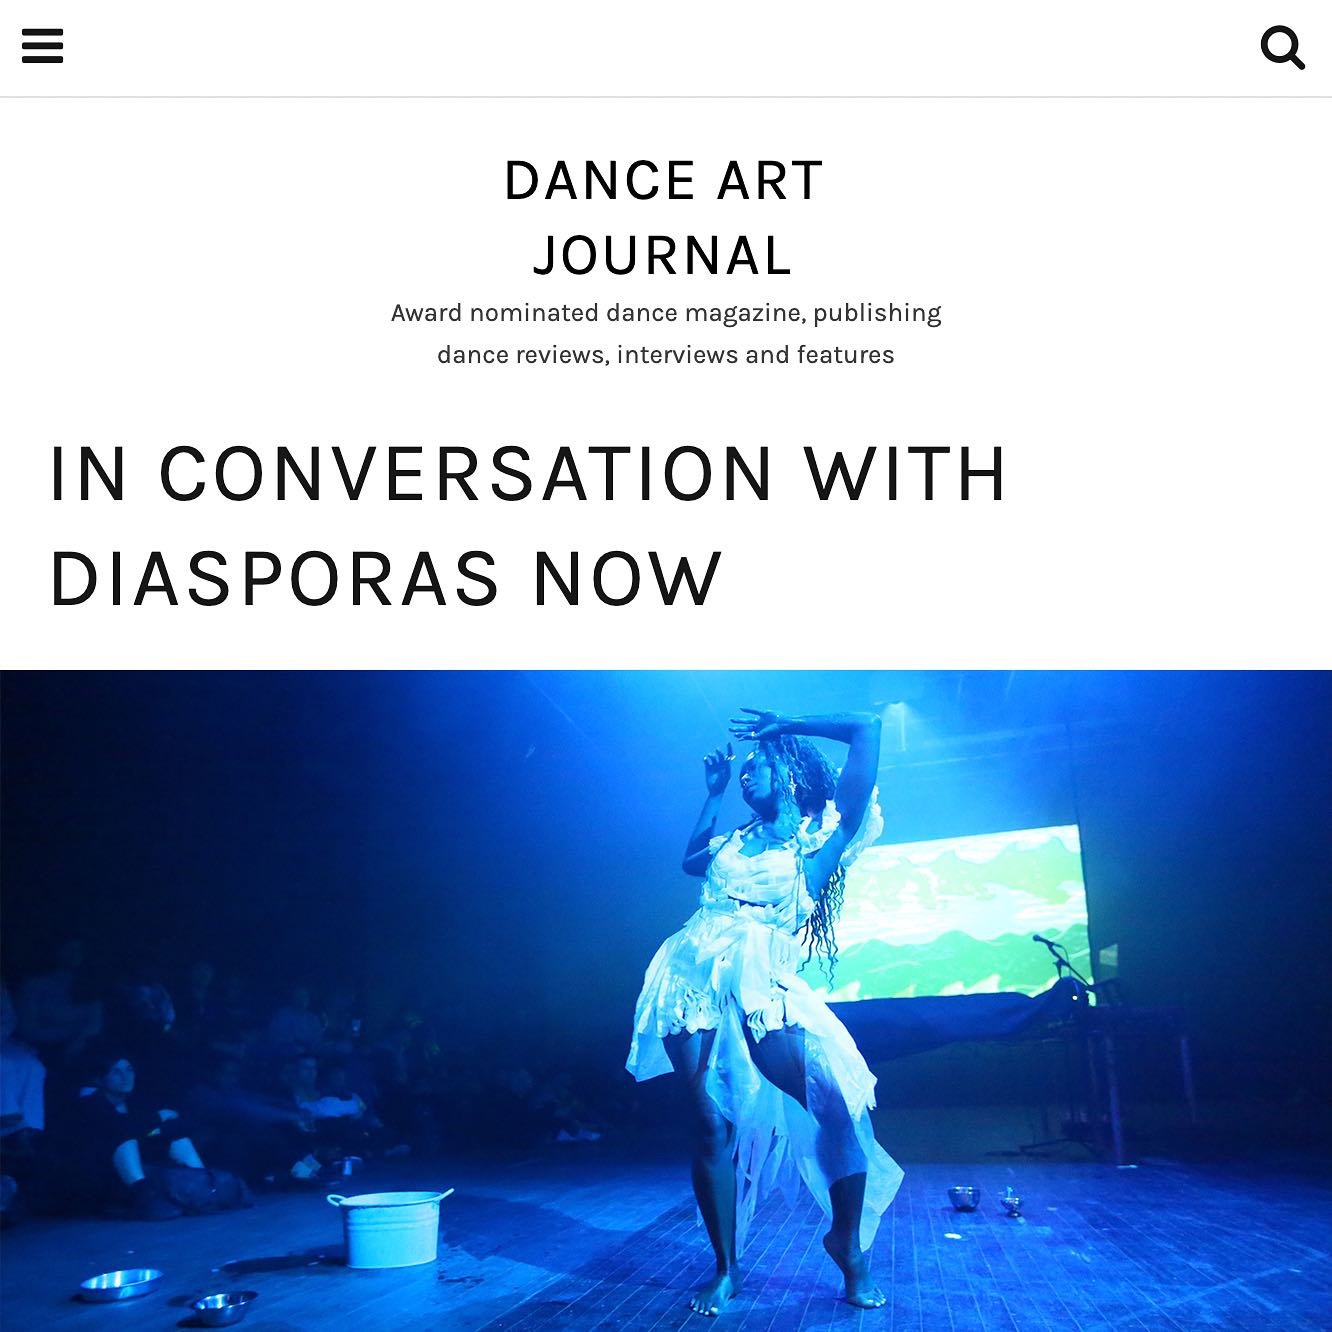 Snippets from our @danceartjournal x @diasporas_now discussion on dance, diaspora, and expanded performance, with beautiful poems by @ardonaxela and @bakanipickup 

𝐼𝒻 𝓌𝑒 𝒹𝓇𝒶𝓌 𝑜𝓊𝓇 𝒶𝓉𝓉𝑒𝓃𝓉𝒾𝑜𝓃 𝓉𝑜 𝓉𝒽𝑒 𝓊𝓃𝒾𝓋𝑒𝓇𝓈𝑒 𝓌𝑒 𝓁𝒾𝓋